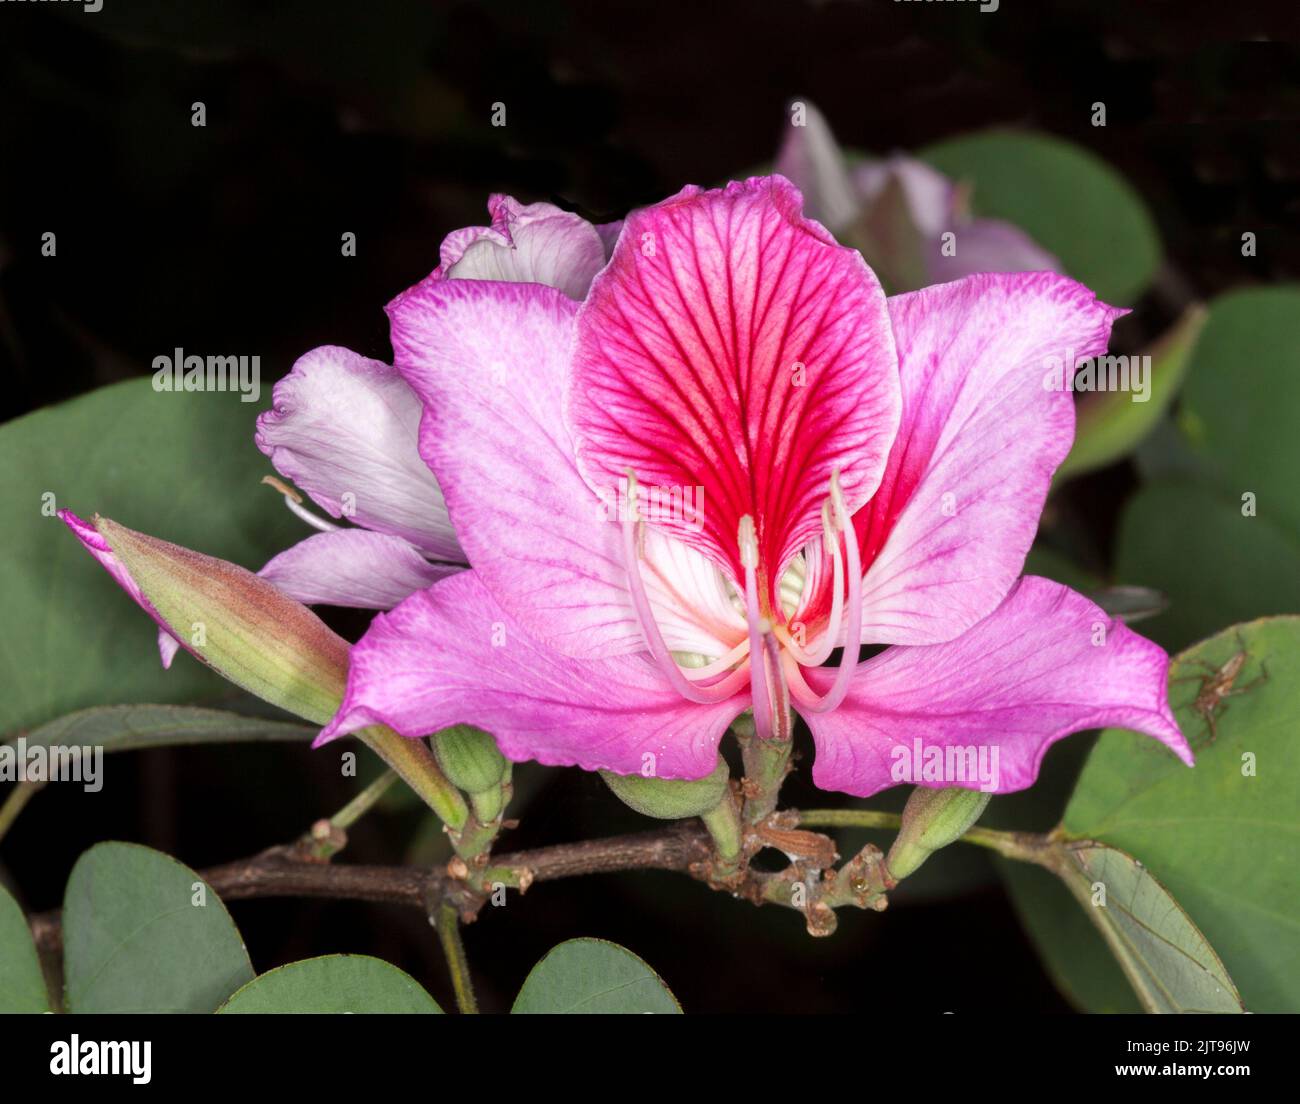 Spectacular pink perfumed flower and green leaves of Bauhinia variegata, deciduous Orchid Tree, on dark background, in Australia Stock Photo